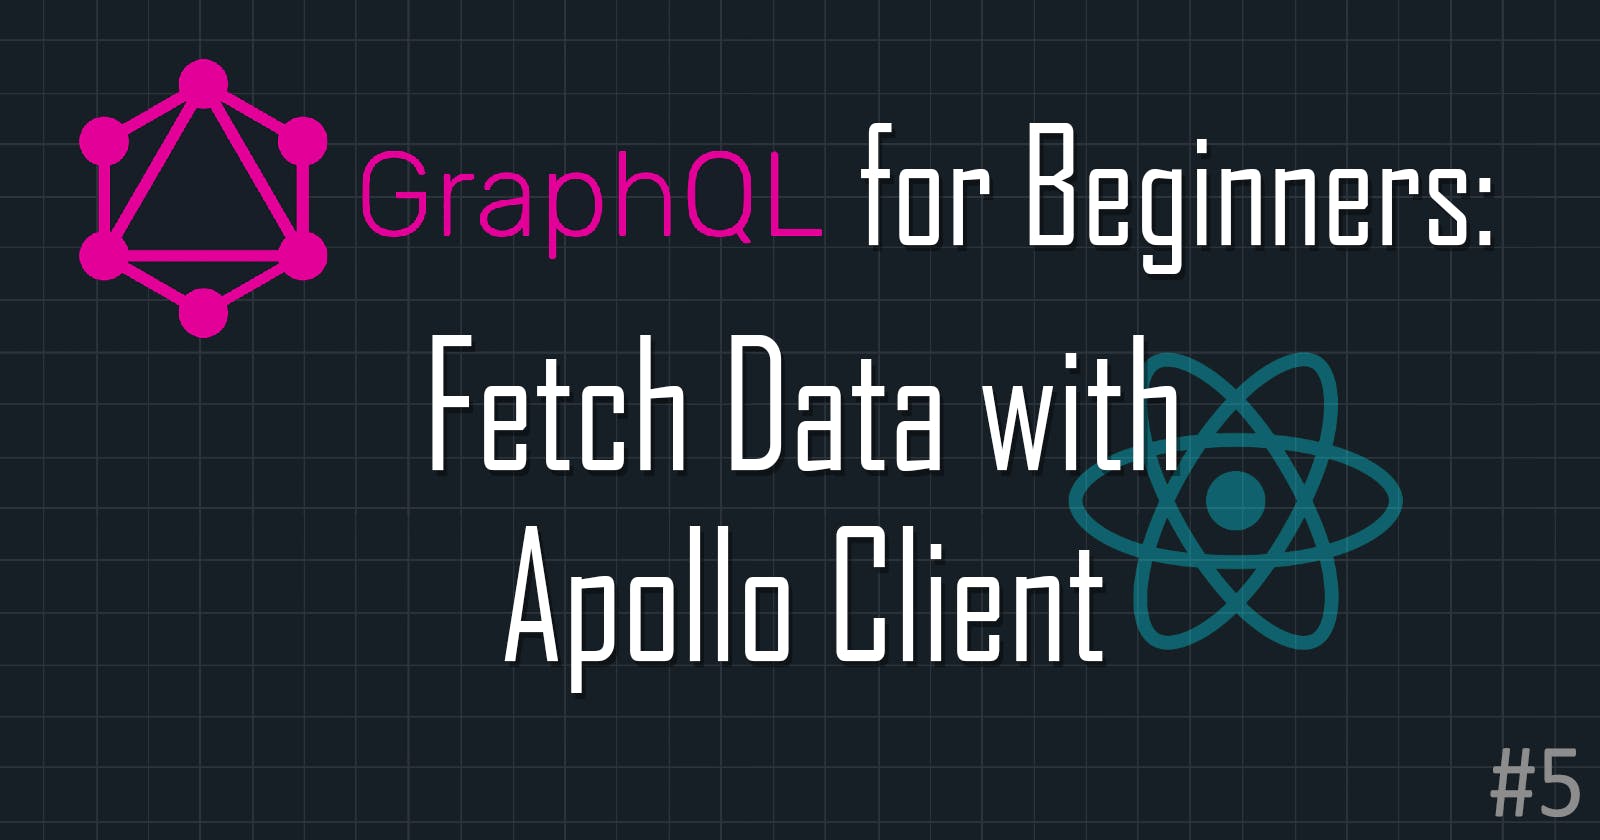 GraphQL for Beginners: Fetch Data from GraphQL APIs with Apollo Client